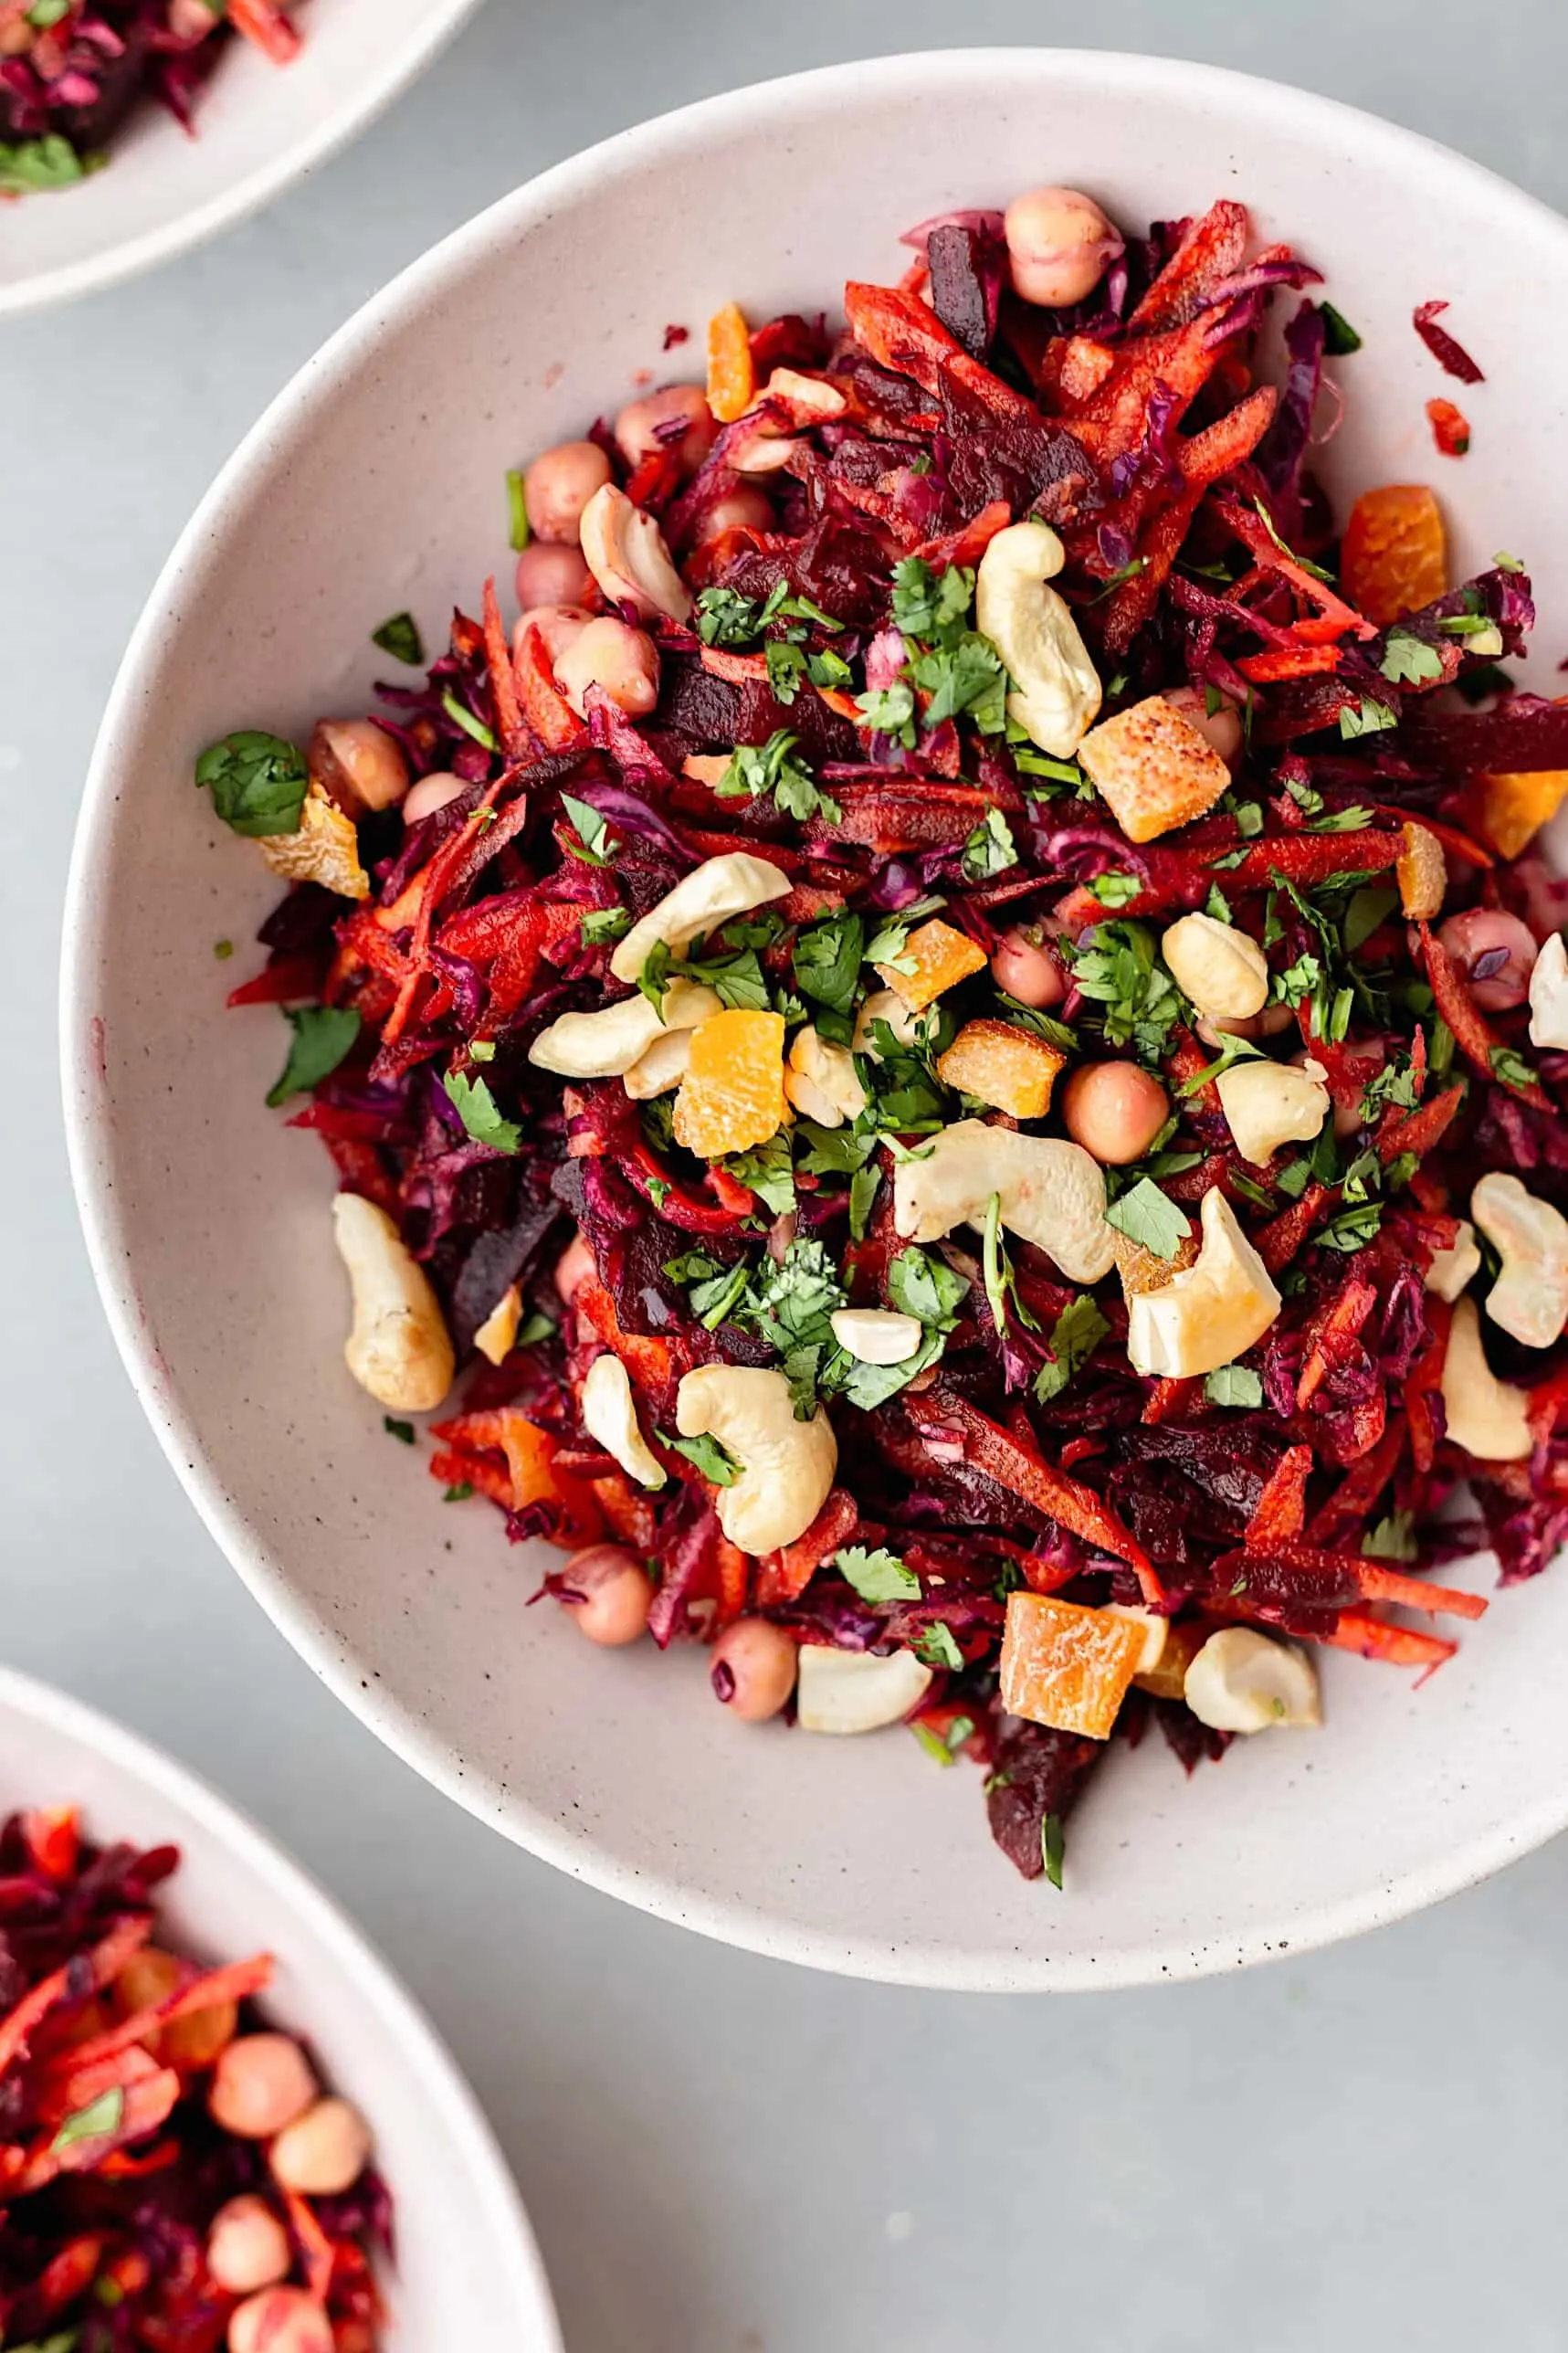 Beetroot salad for the winter?